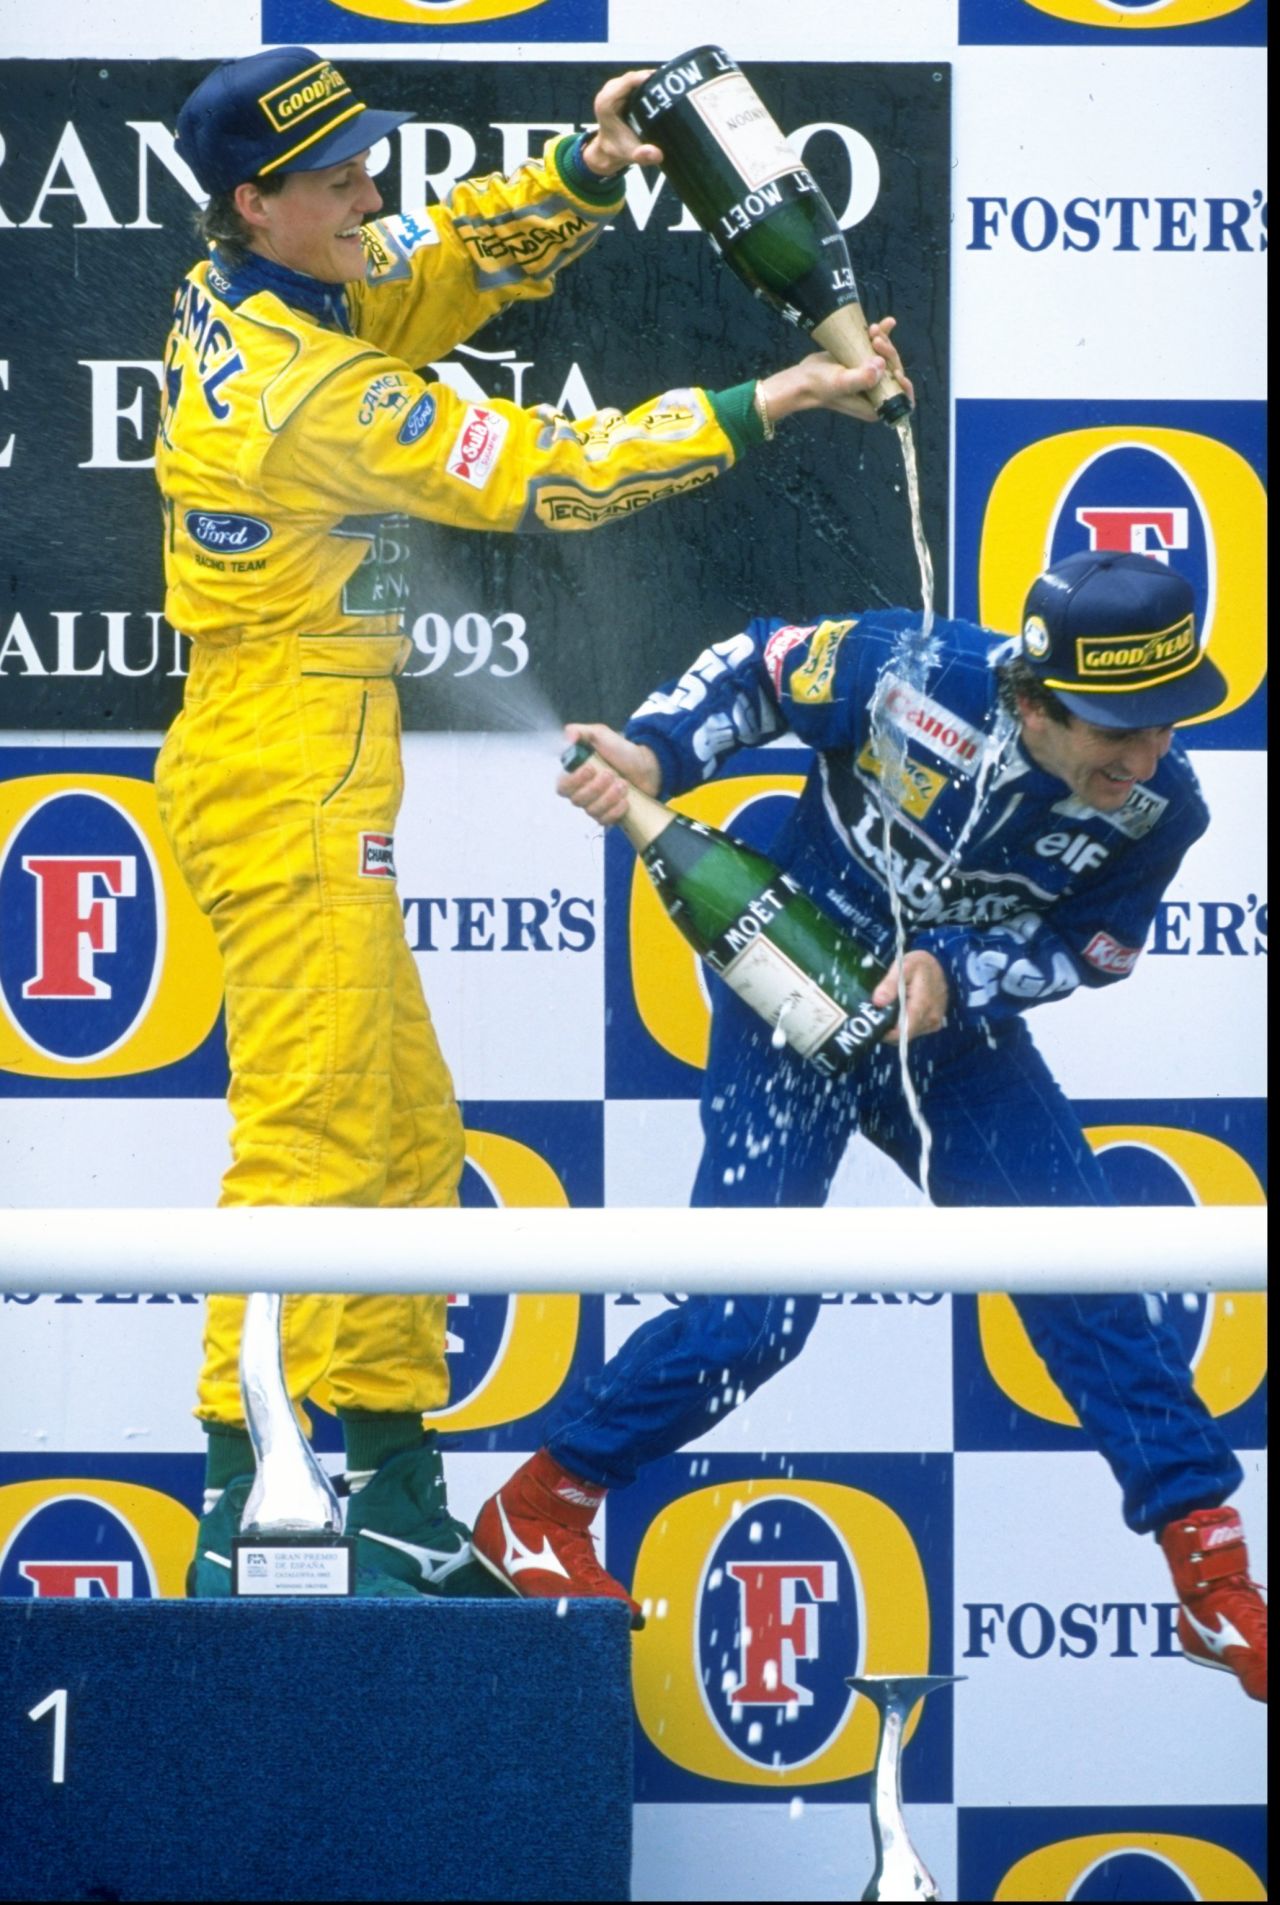 In the latter part of career Prost had to battle with the youthful exuberance of future seven-time champion Michael Schumacher.